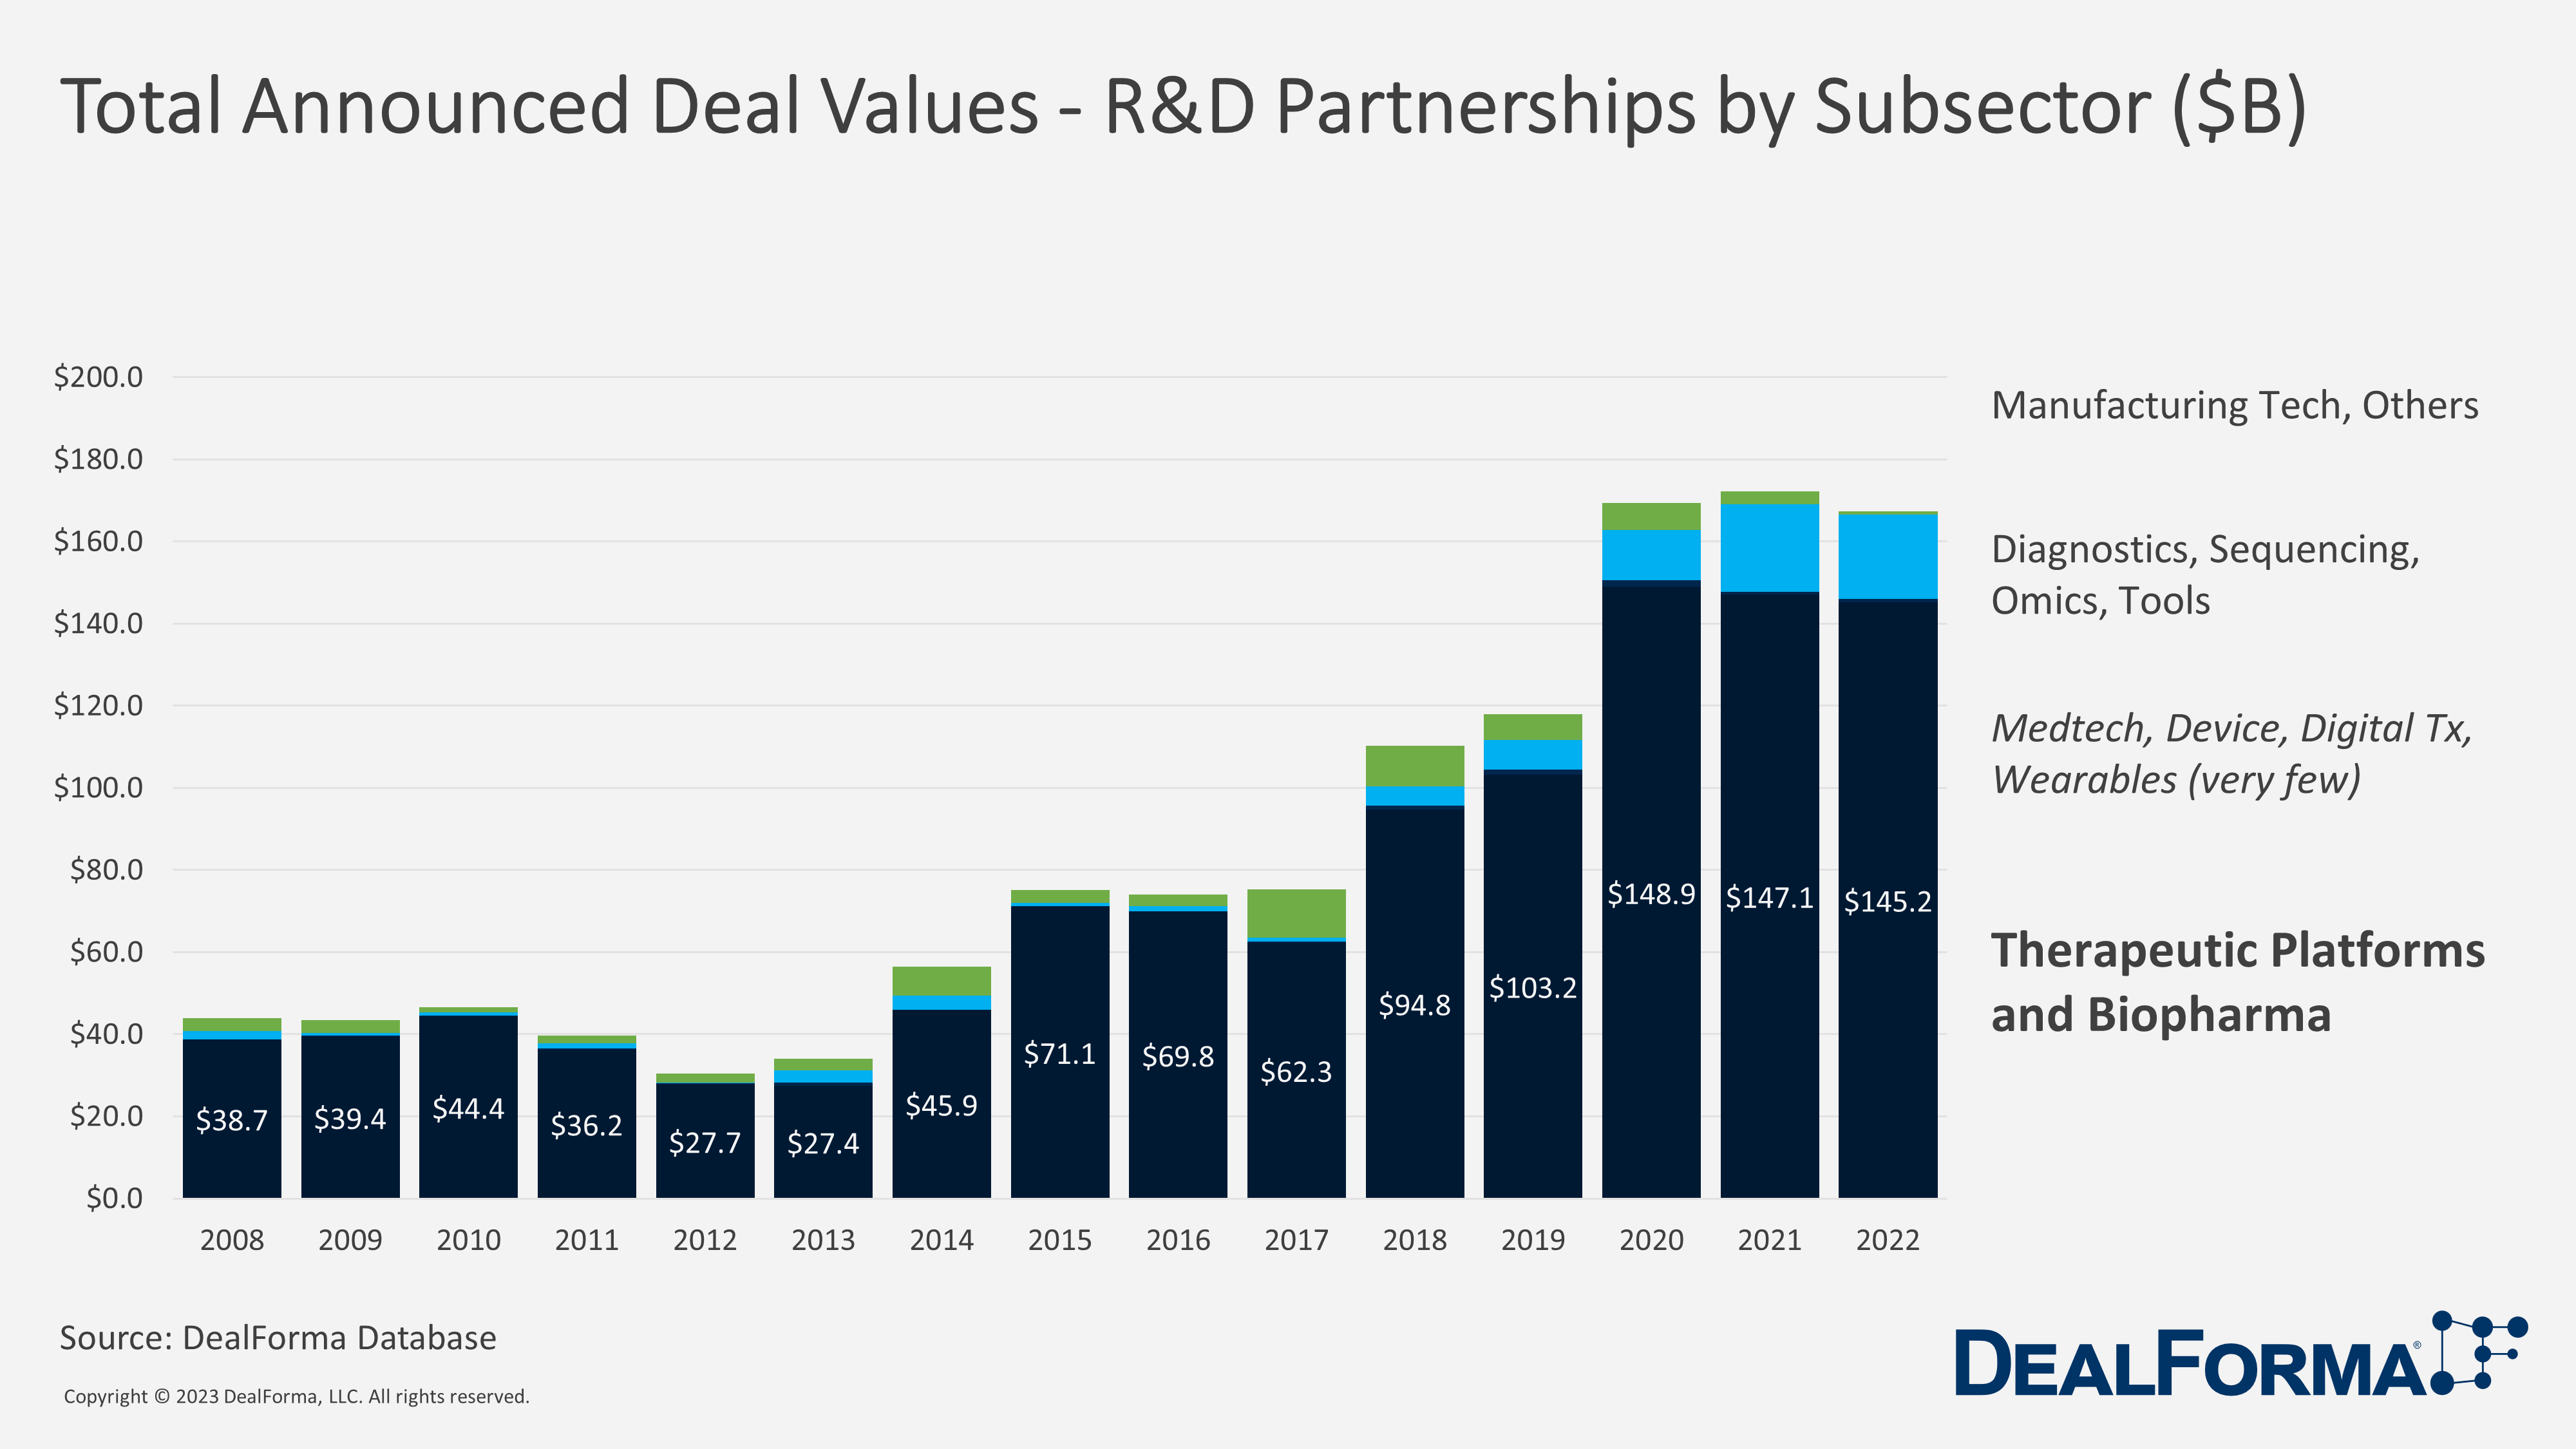 Total Announced Deal Values - R&D Partnerships by Subsector